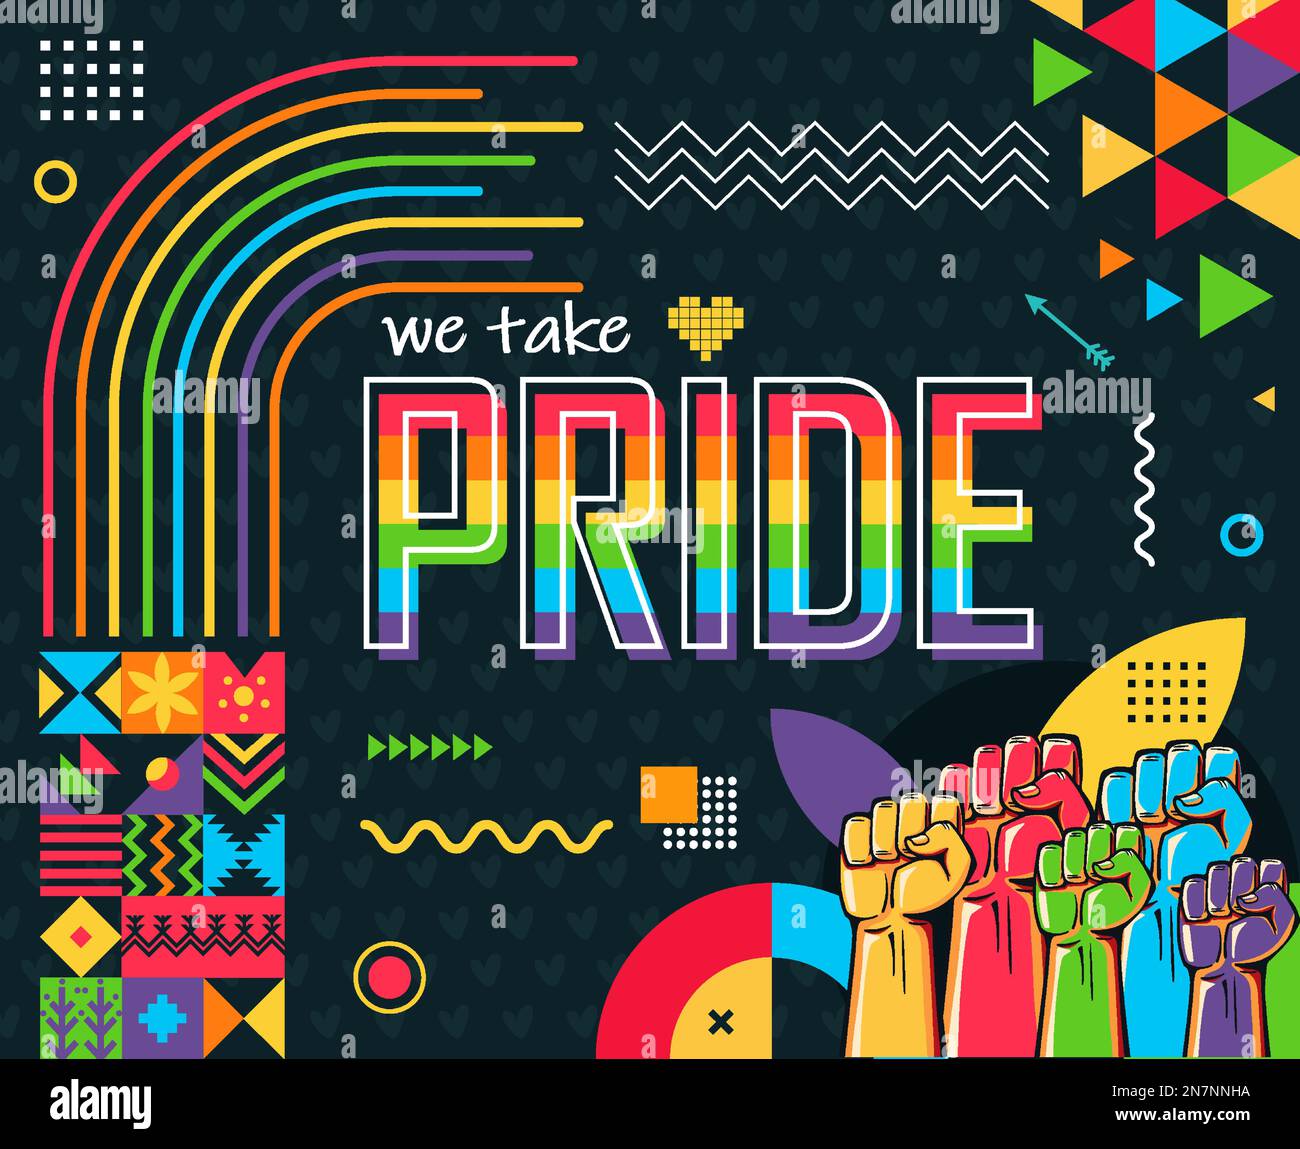 Pride day design with modern abstract background. Colorful Rainbow LGBTQ rights. Lesbians, gays, bisexuals, transgenders, queer. LGBTQ community flag. Stock Vector